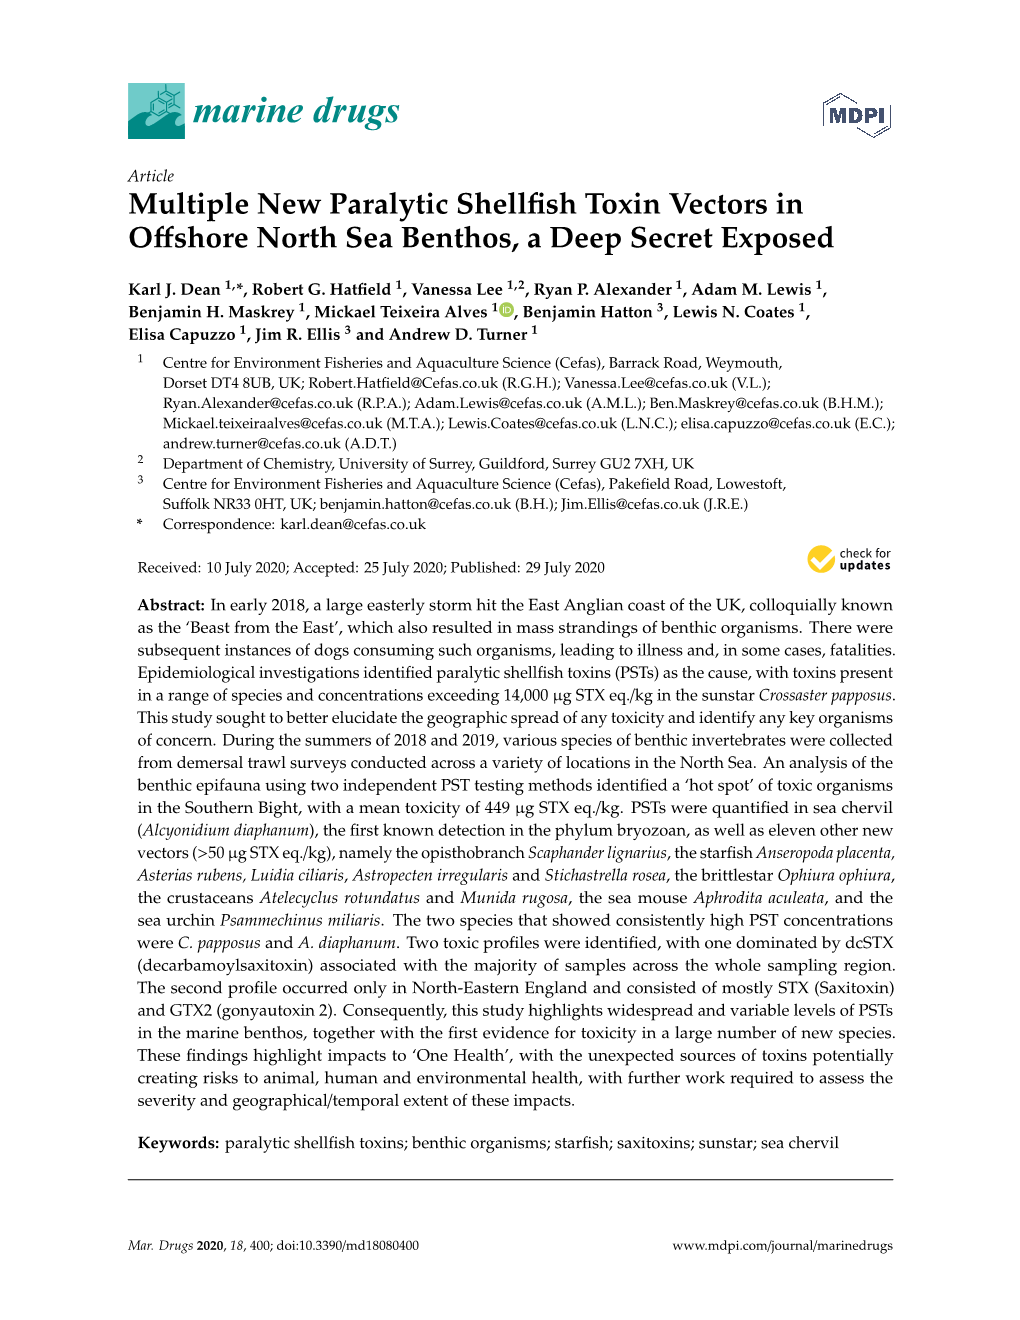 Multiple New Paralytic Shellfish Toxin Vectors in Offshore